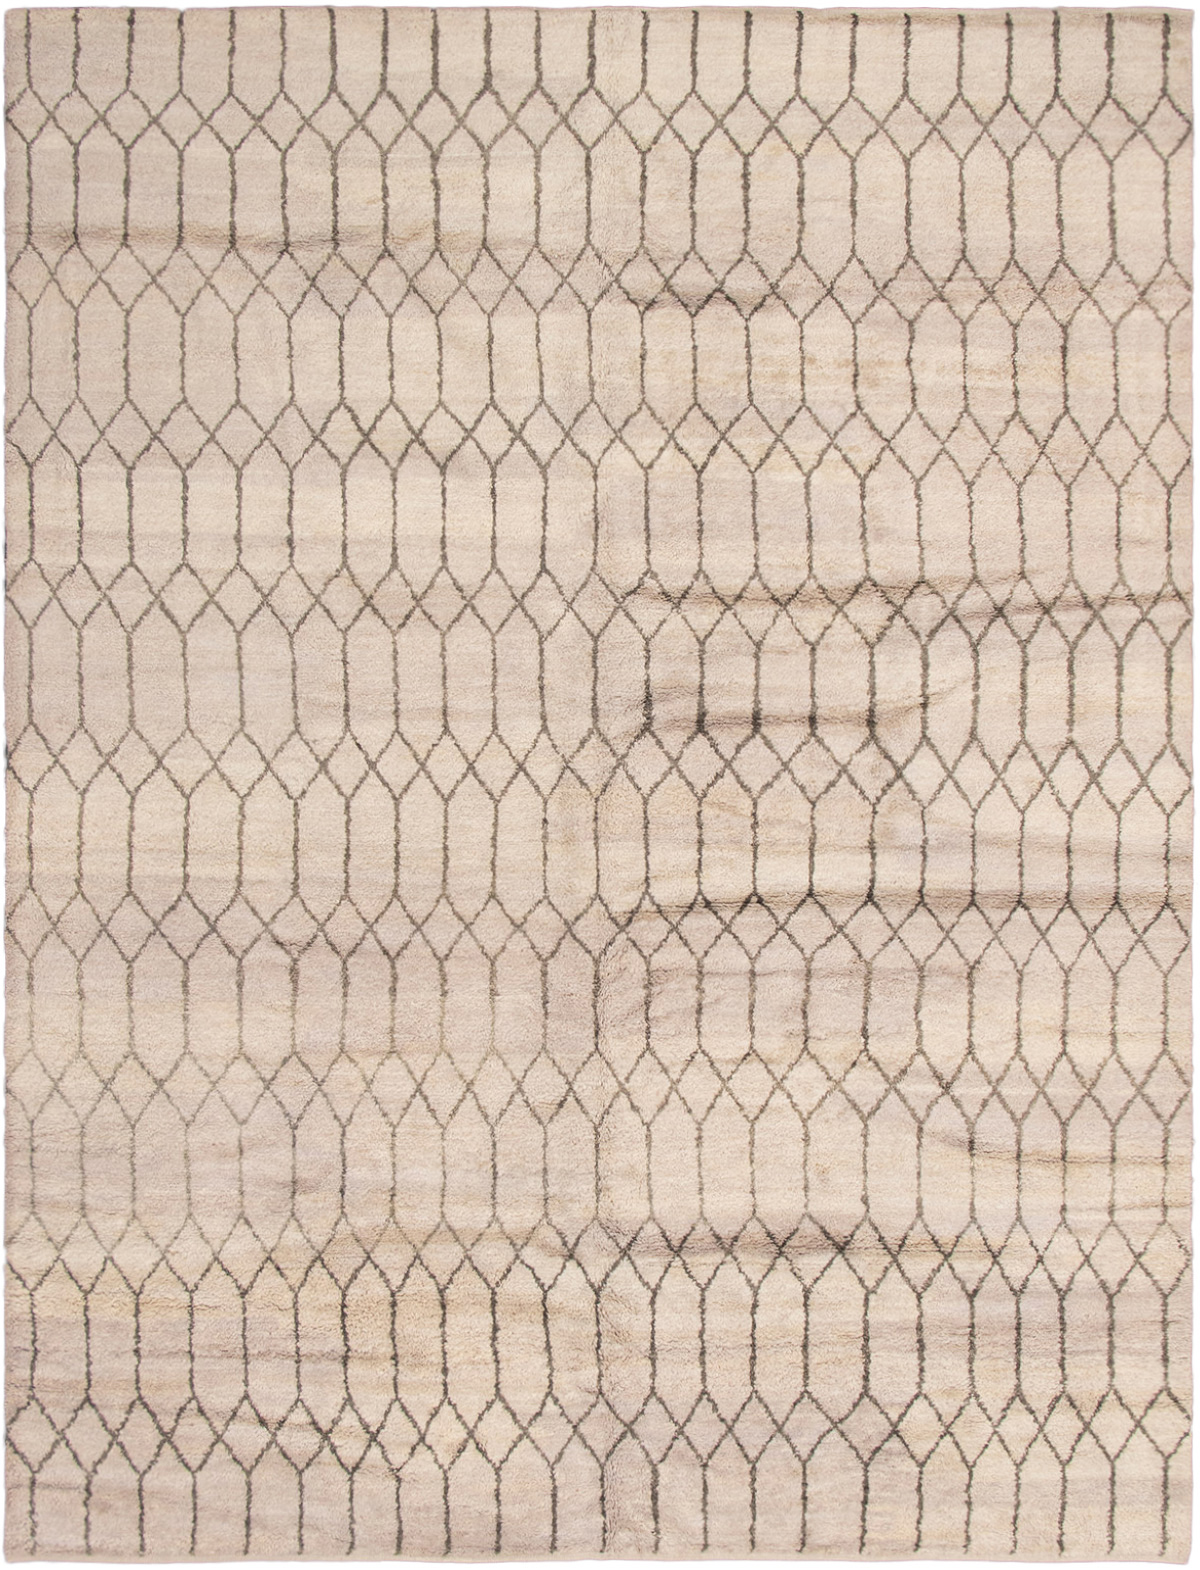 Hand-knotted Arlequin Light Khaki Wool Rug 10'2" x 13'6" Size: 10'2" x 13'6"  